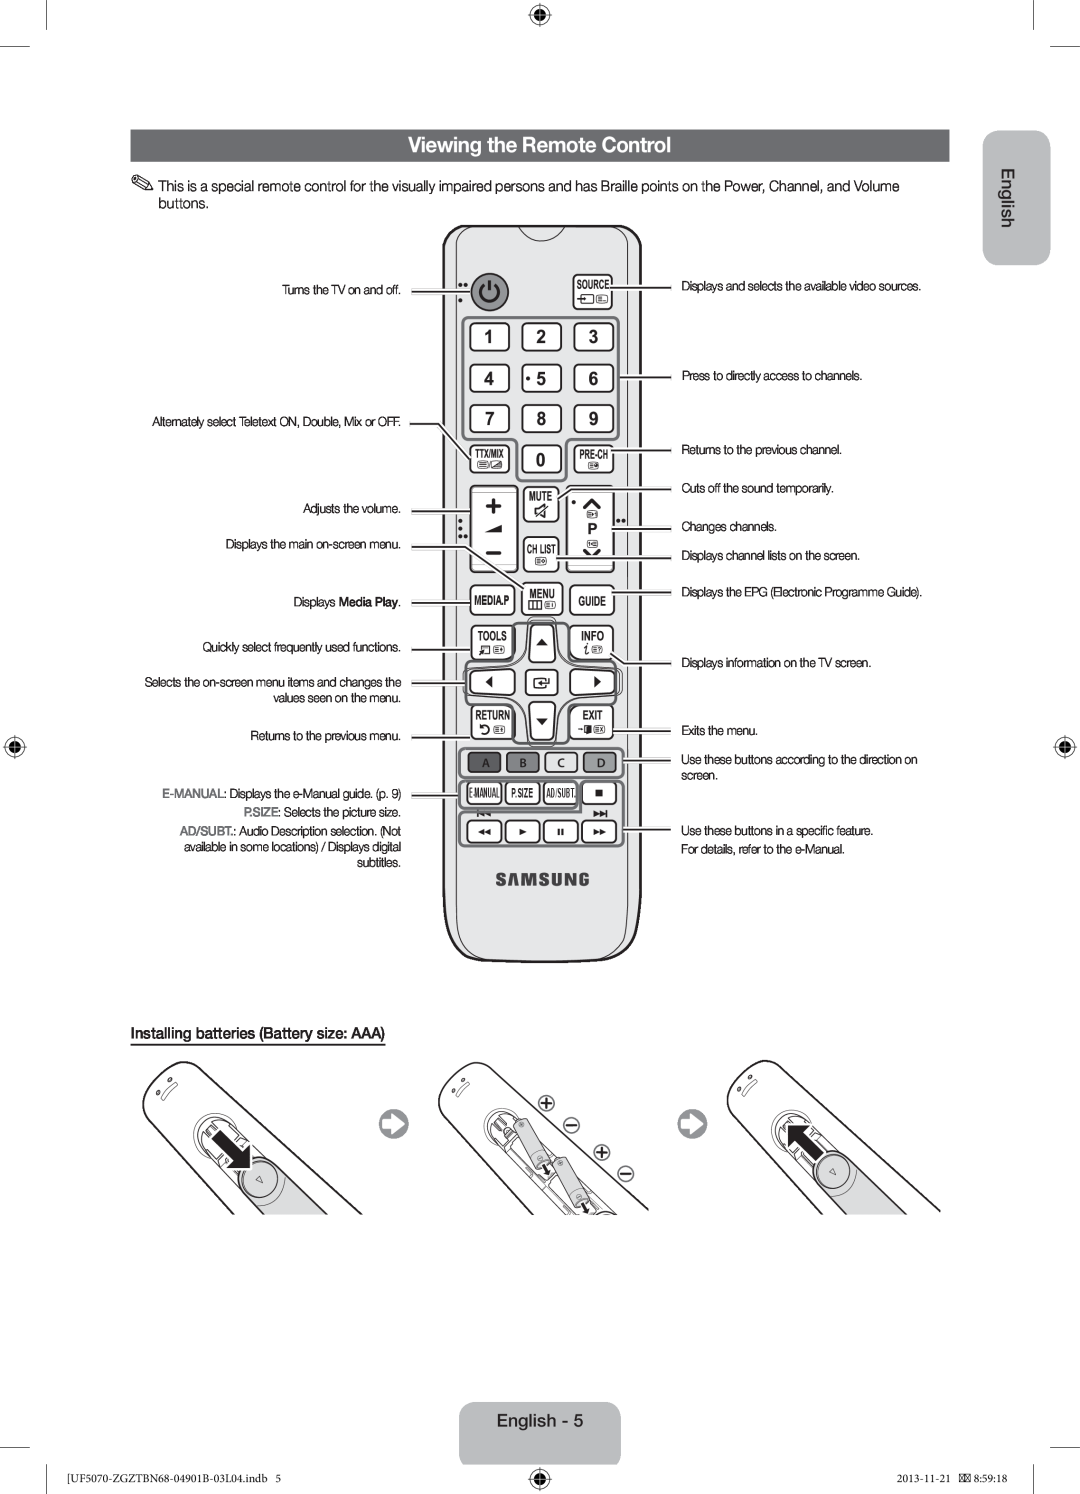 Samsung UE39F5070SSXZG, UE46F5000AWXXH manual Viewing the Remote Control, Installing batteries Battery size AAA, English 